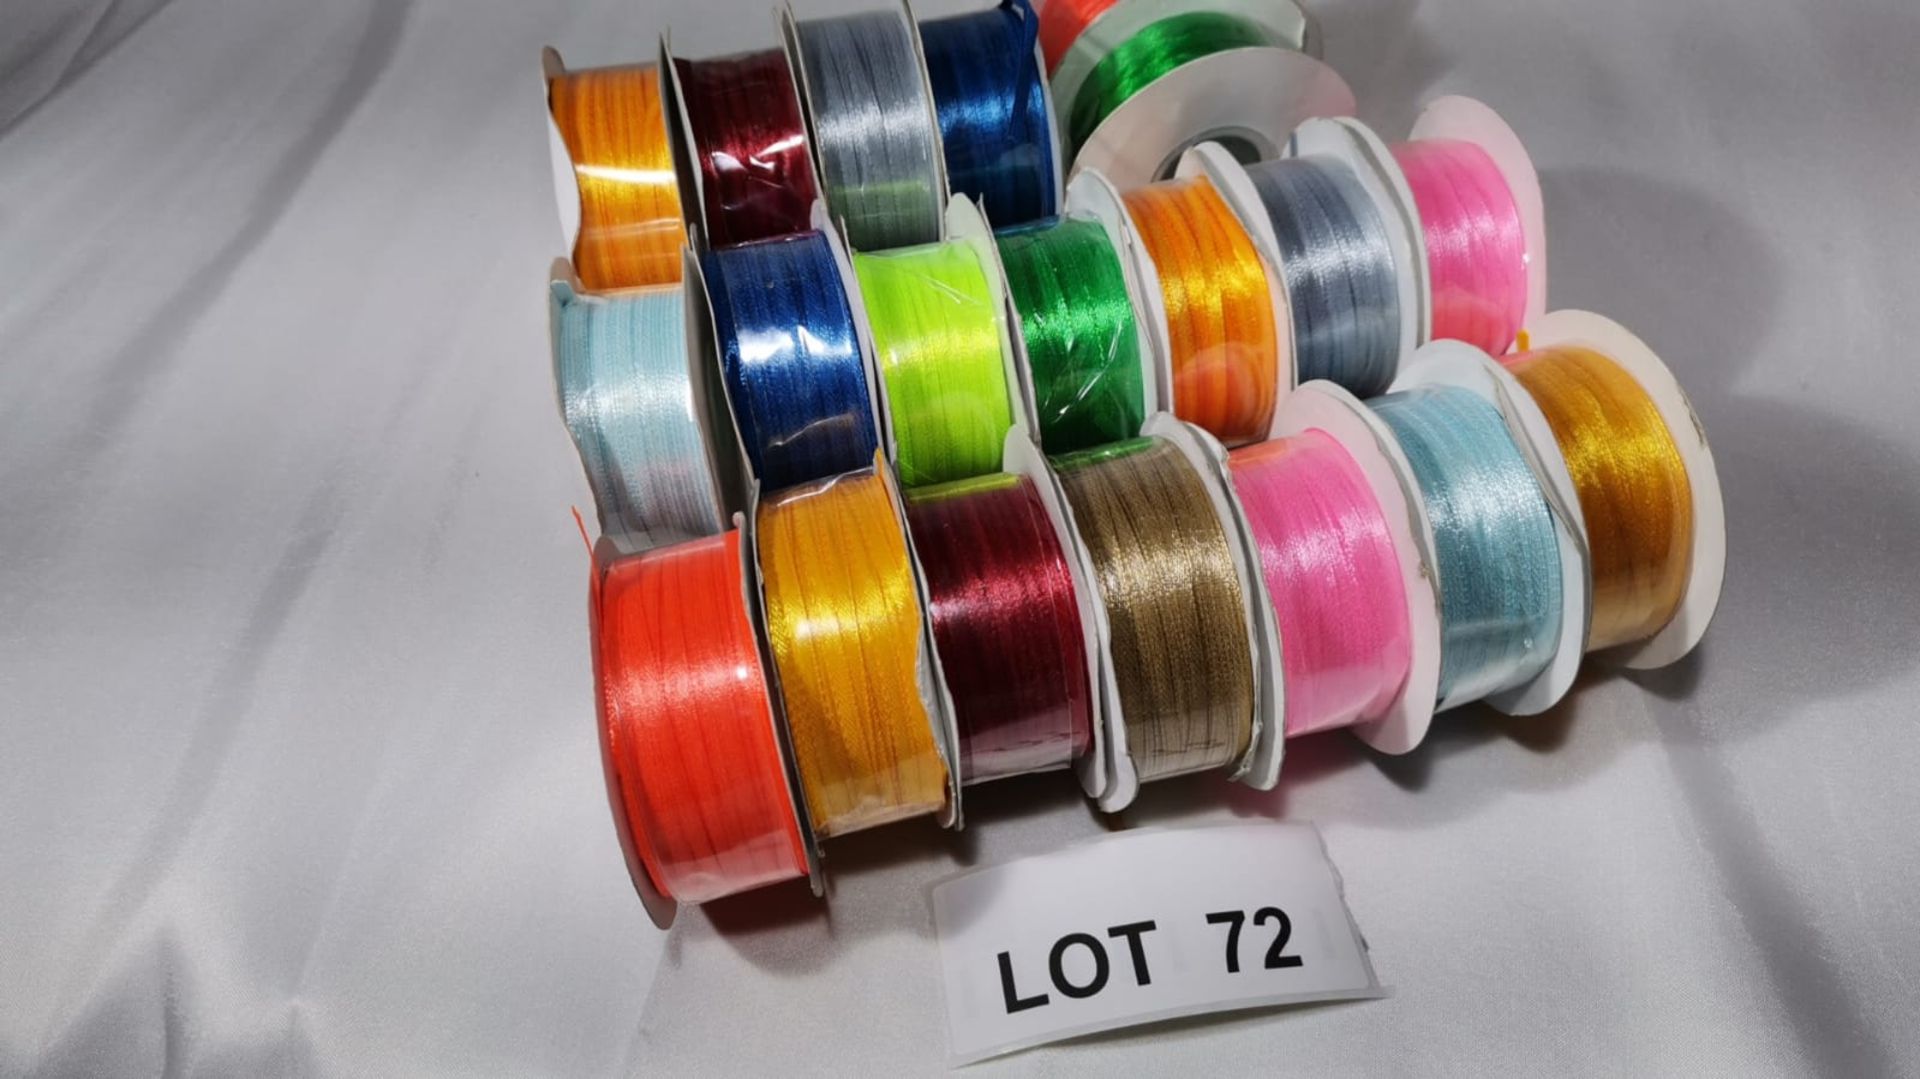 20 Rolls of 3mm Wide x 100 Yards of Smooth Satin Ribbon. RRP £140 - Image 2 of 2